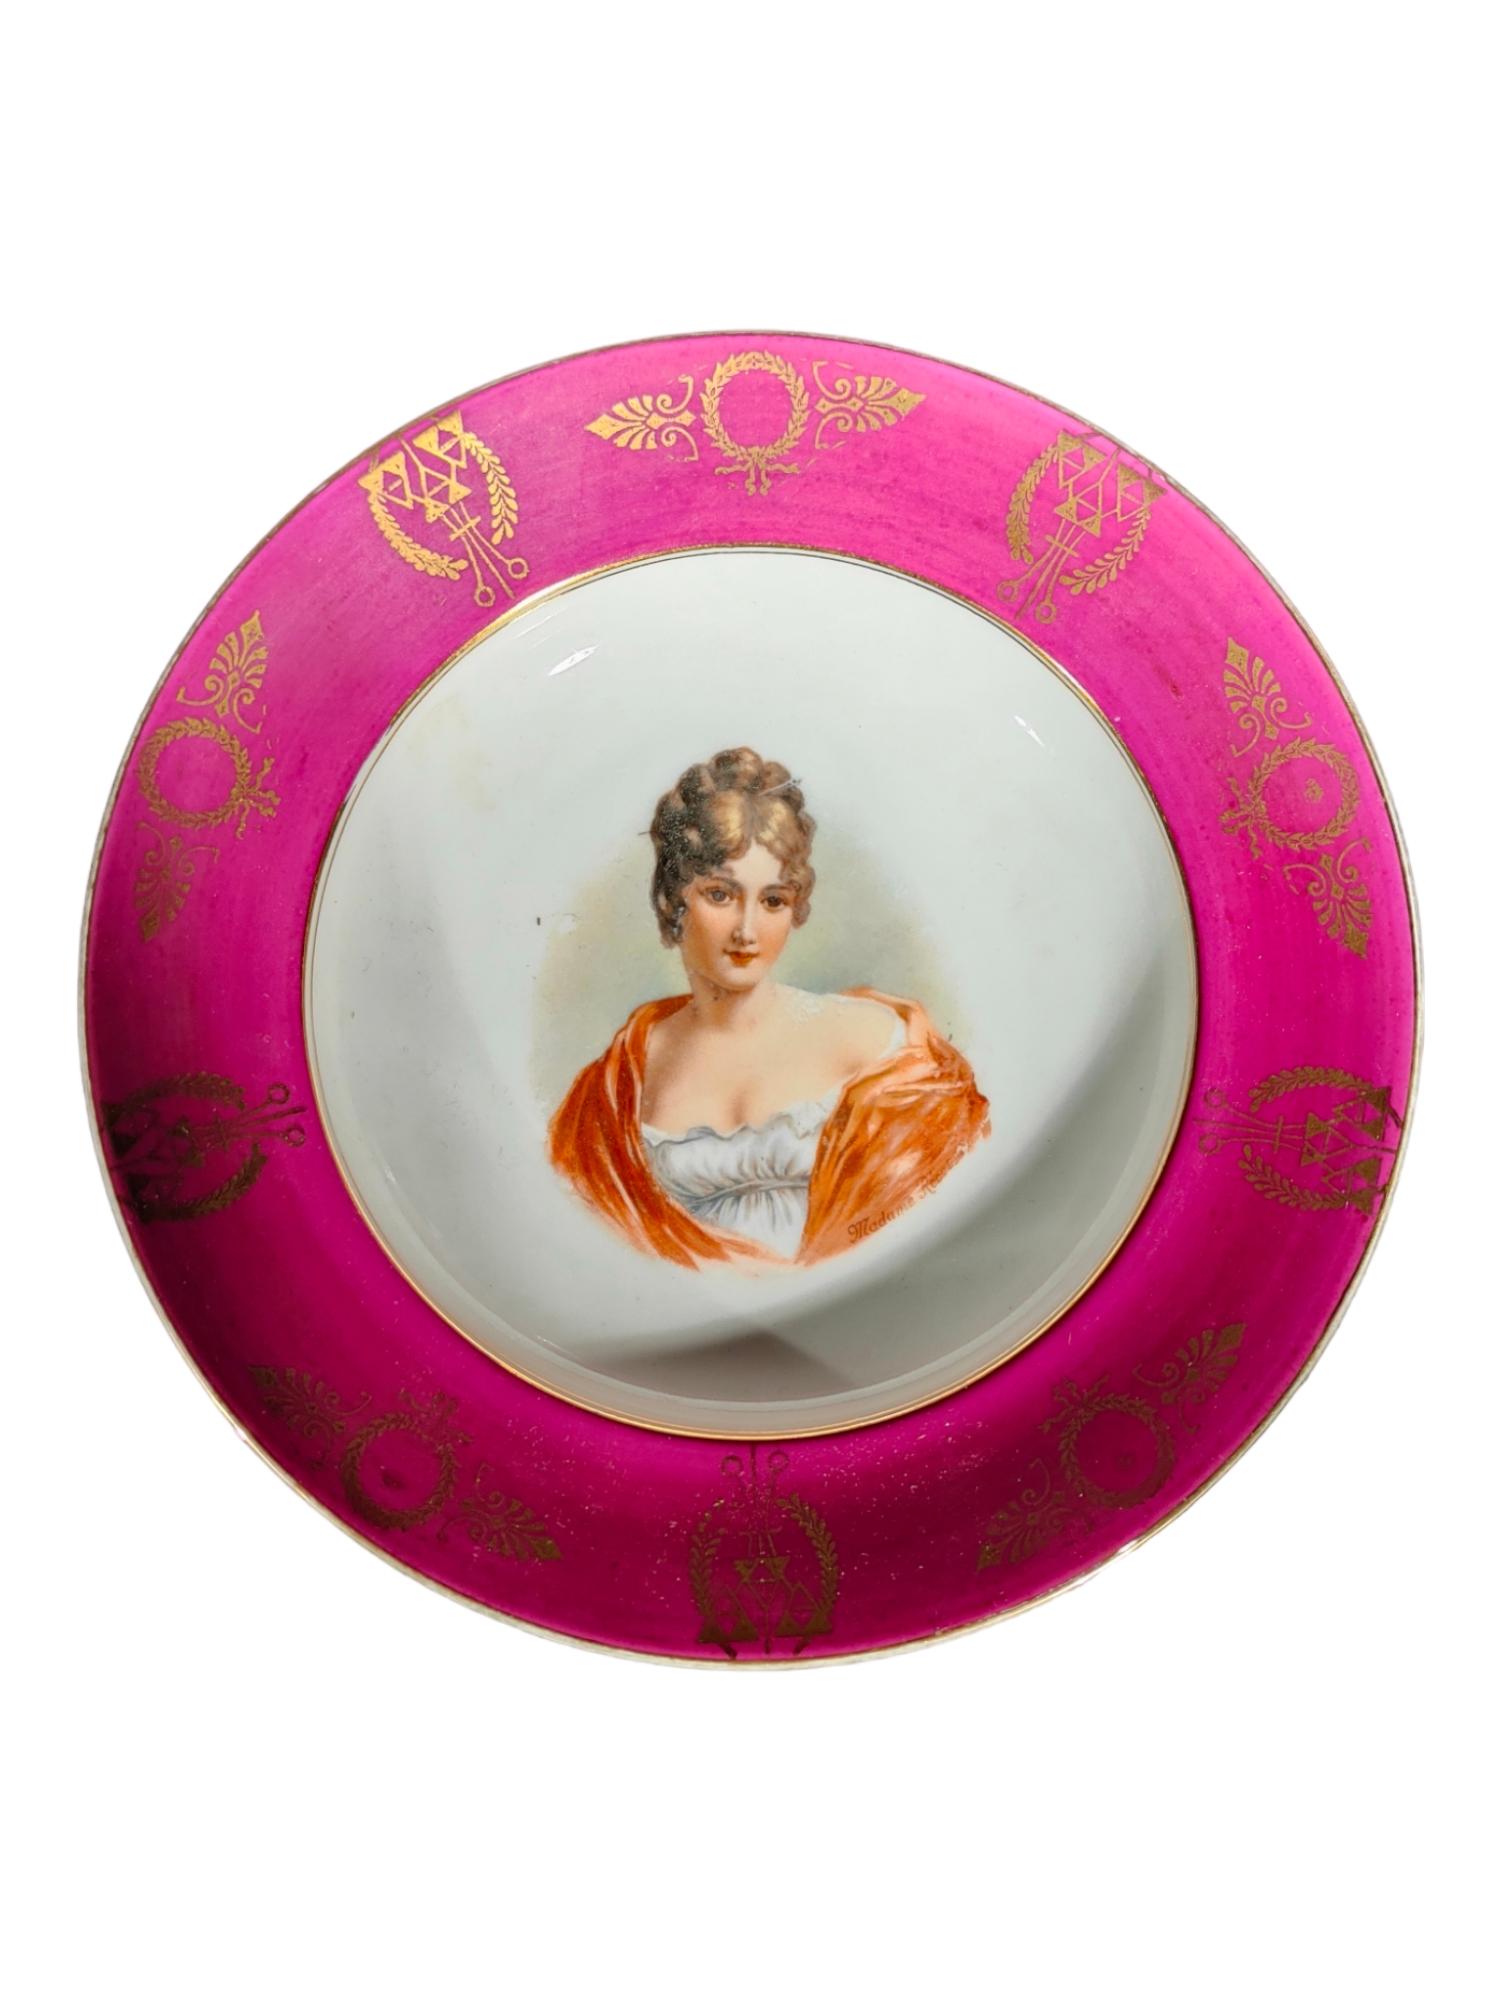 19th Century Service, Porcelain Tableware with Napoleon Pirkenhammer, 1880 For Sale